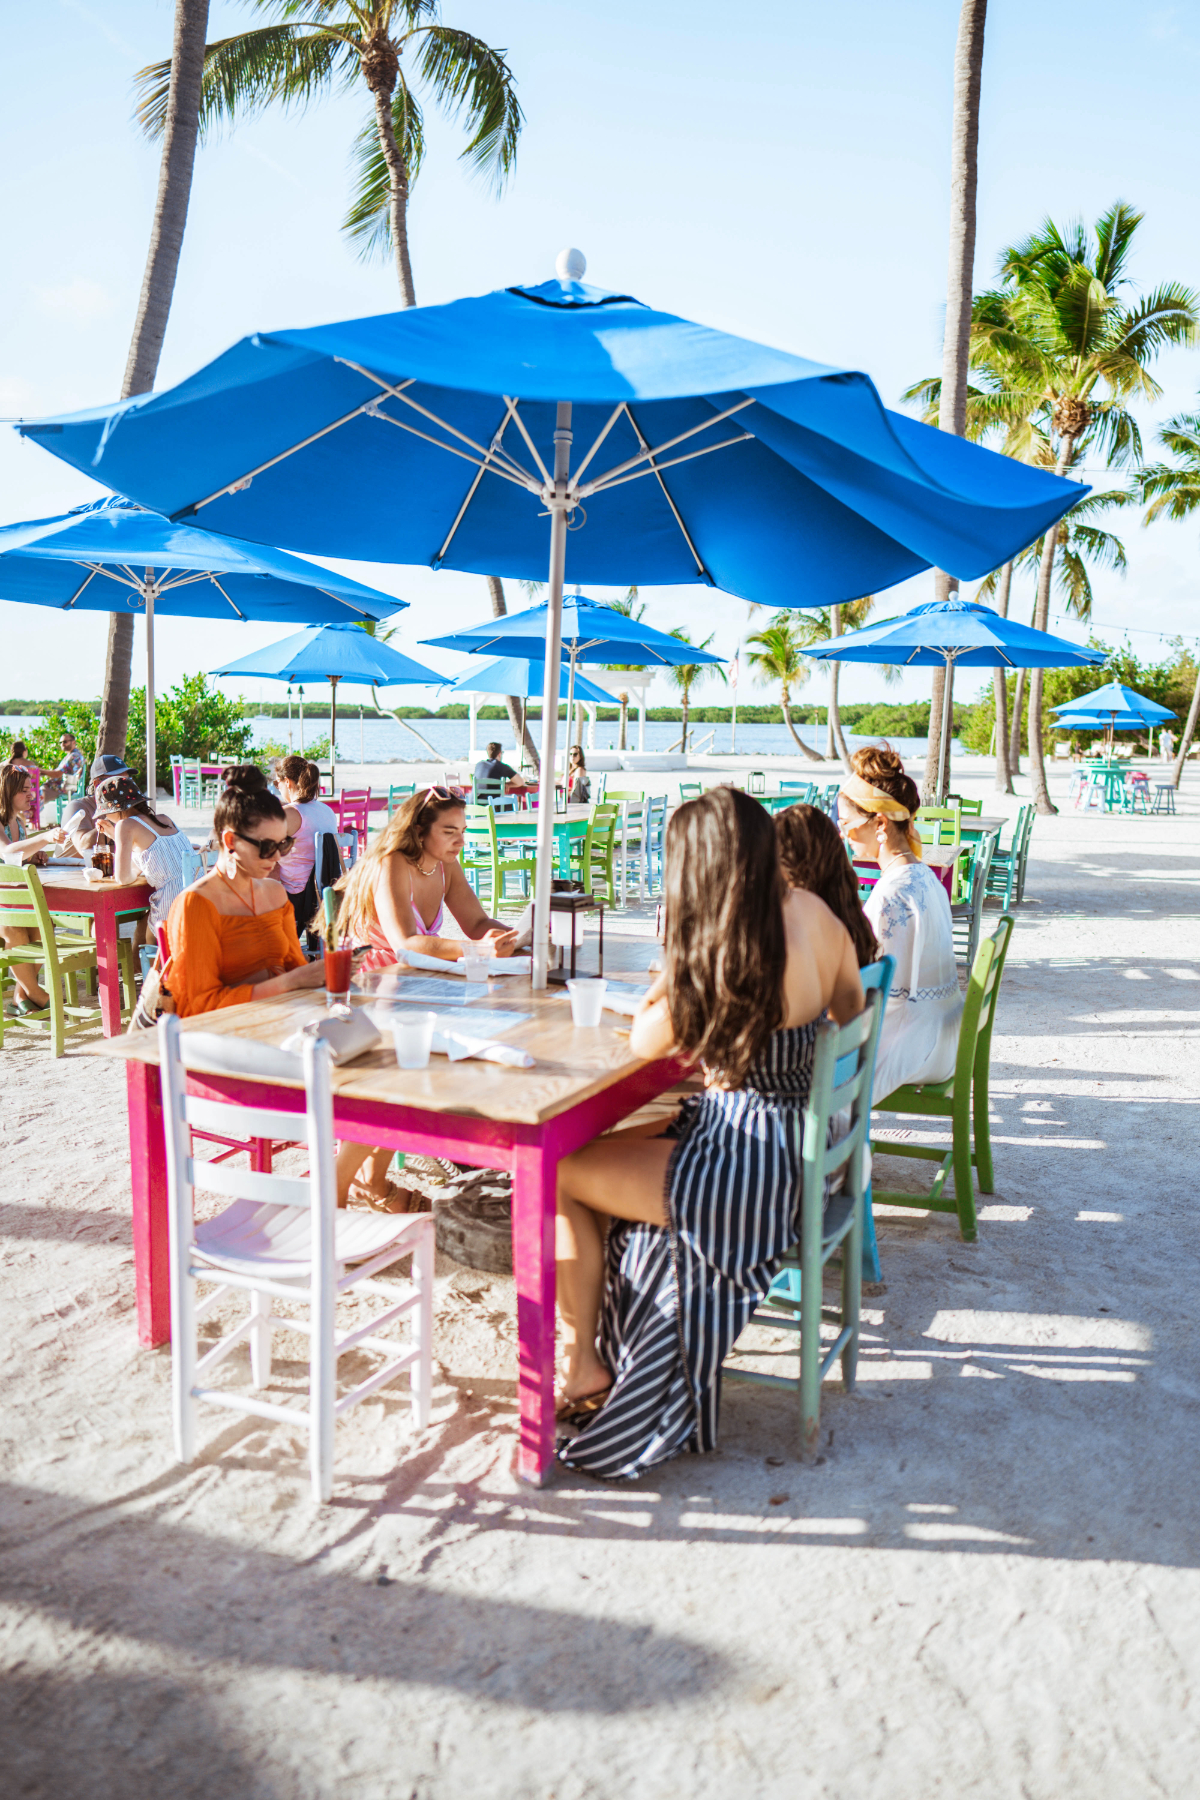 Five women sit at a wooden, colorful beach table under an umbrella looking at the dinner menu offered at Morada Bay Beach Cafe in Islamorada